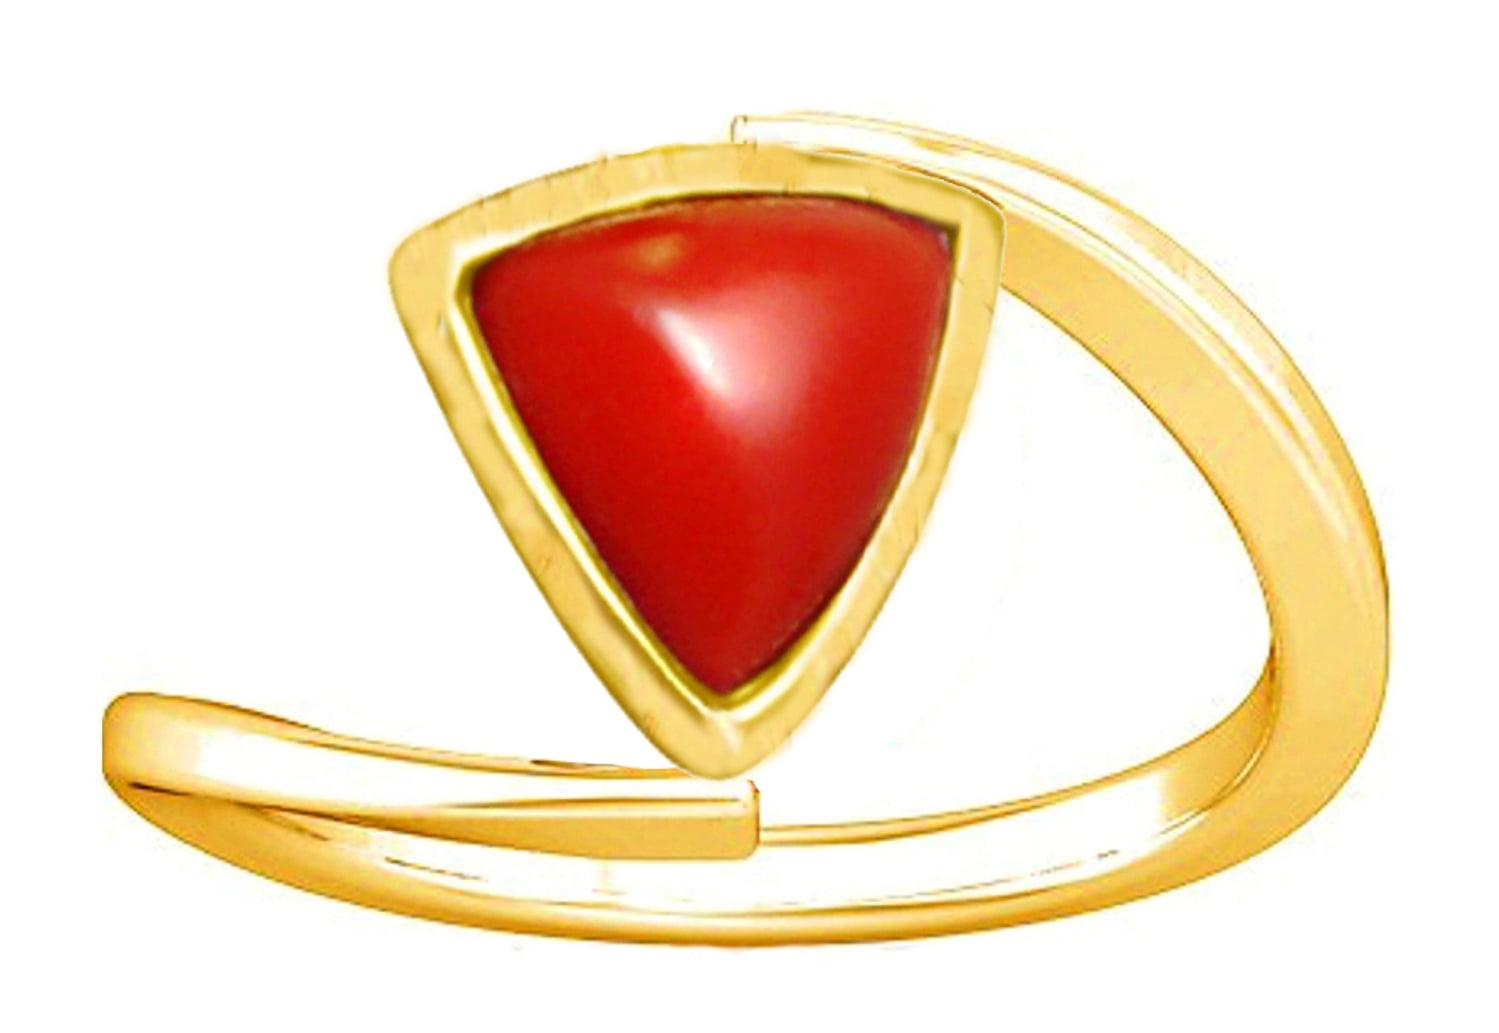 fcity.in - A Quality Moonga Stone Ring For Women / A Quality Moonga Stone  Ring